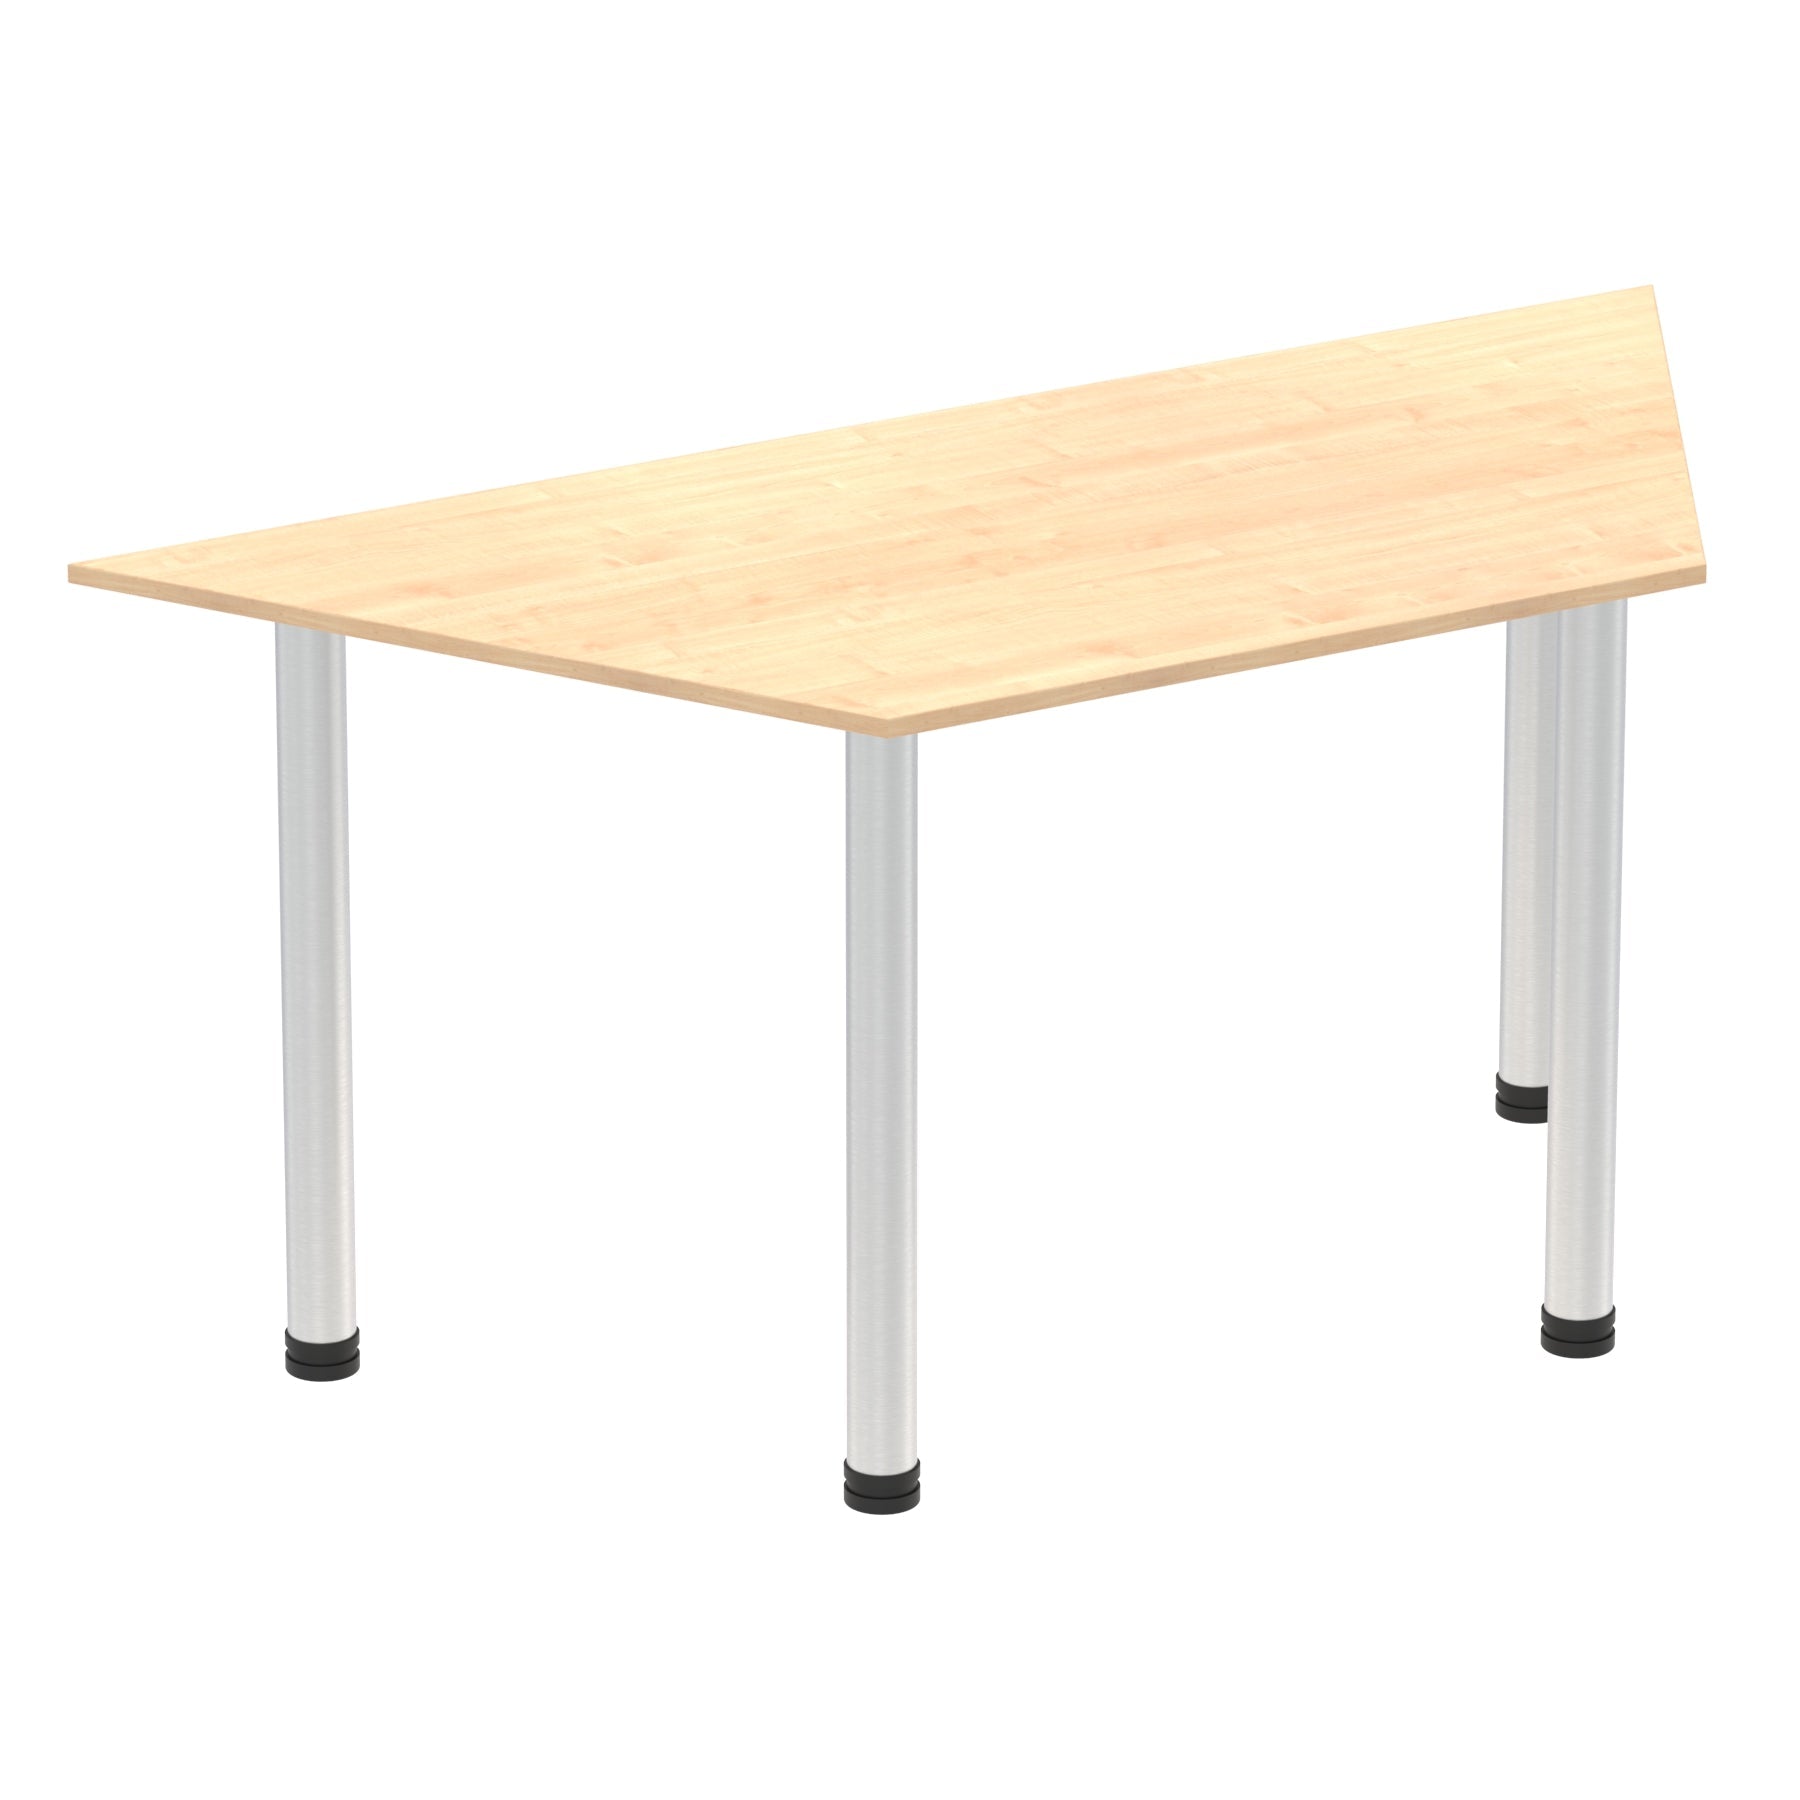 Impulse Trapezium Table 1600x800mm with Post Leg - MFC Material, Self-Assembly, 5-Year Guarantee, Multiple Frame Colors